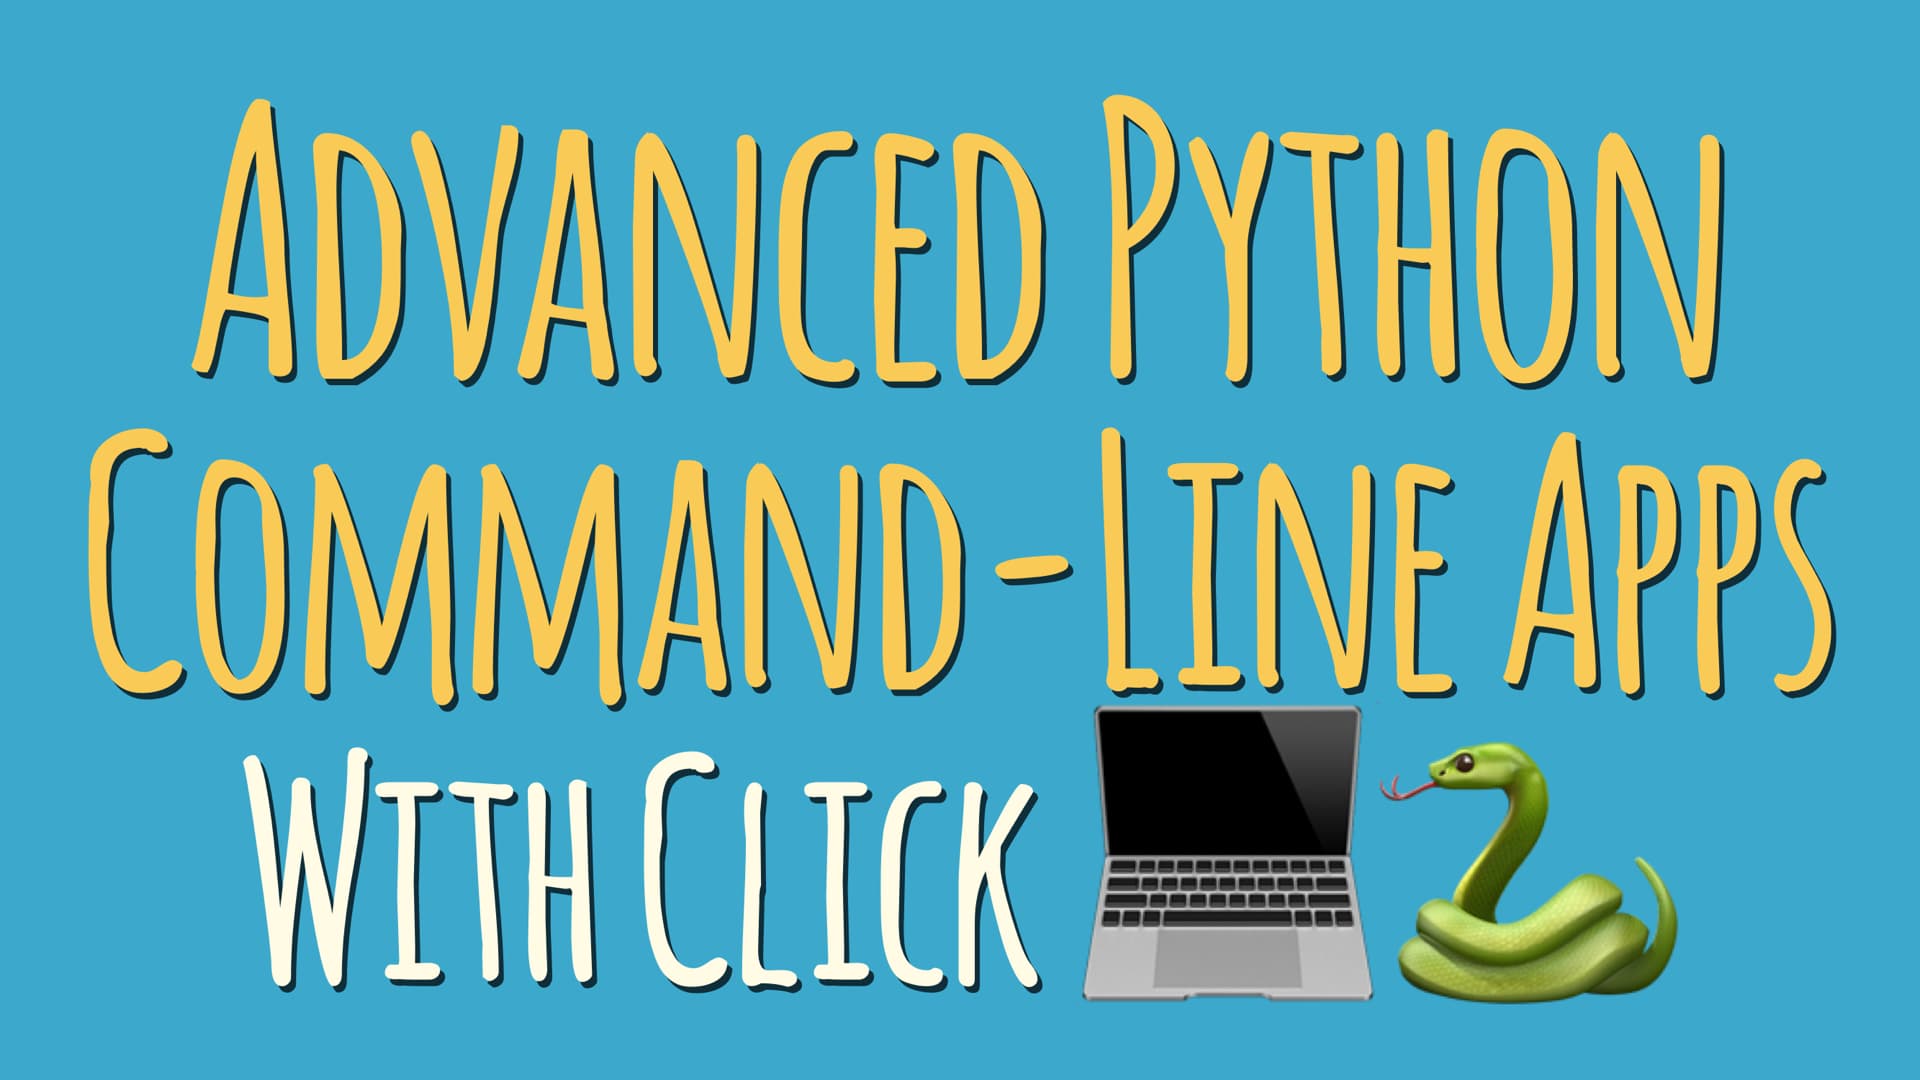 Mastering Click: Writing Advanced Python Command-Line Apps